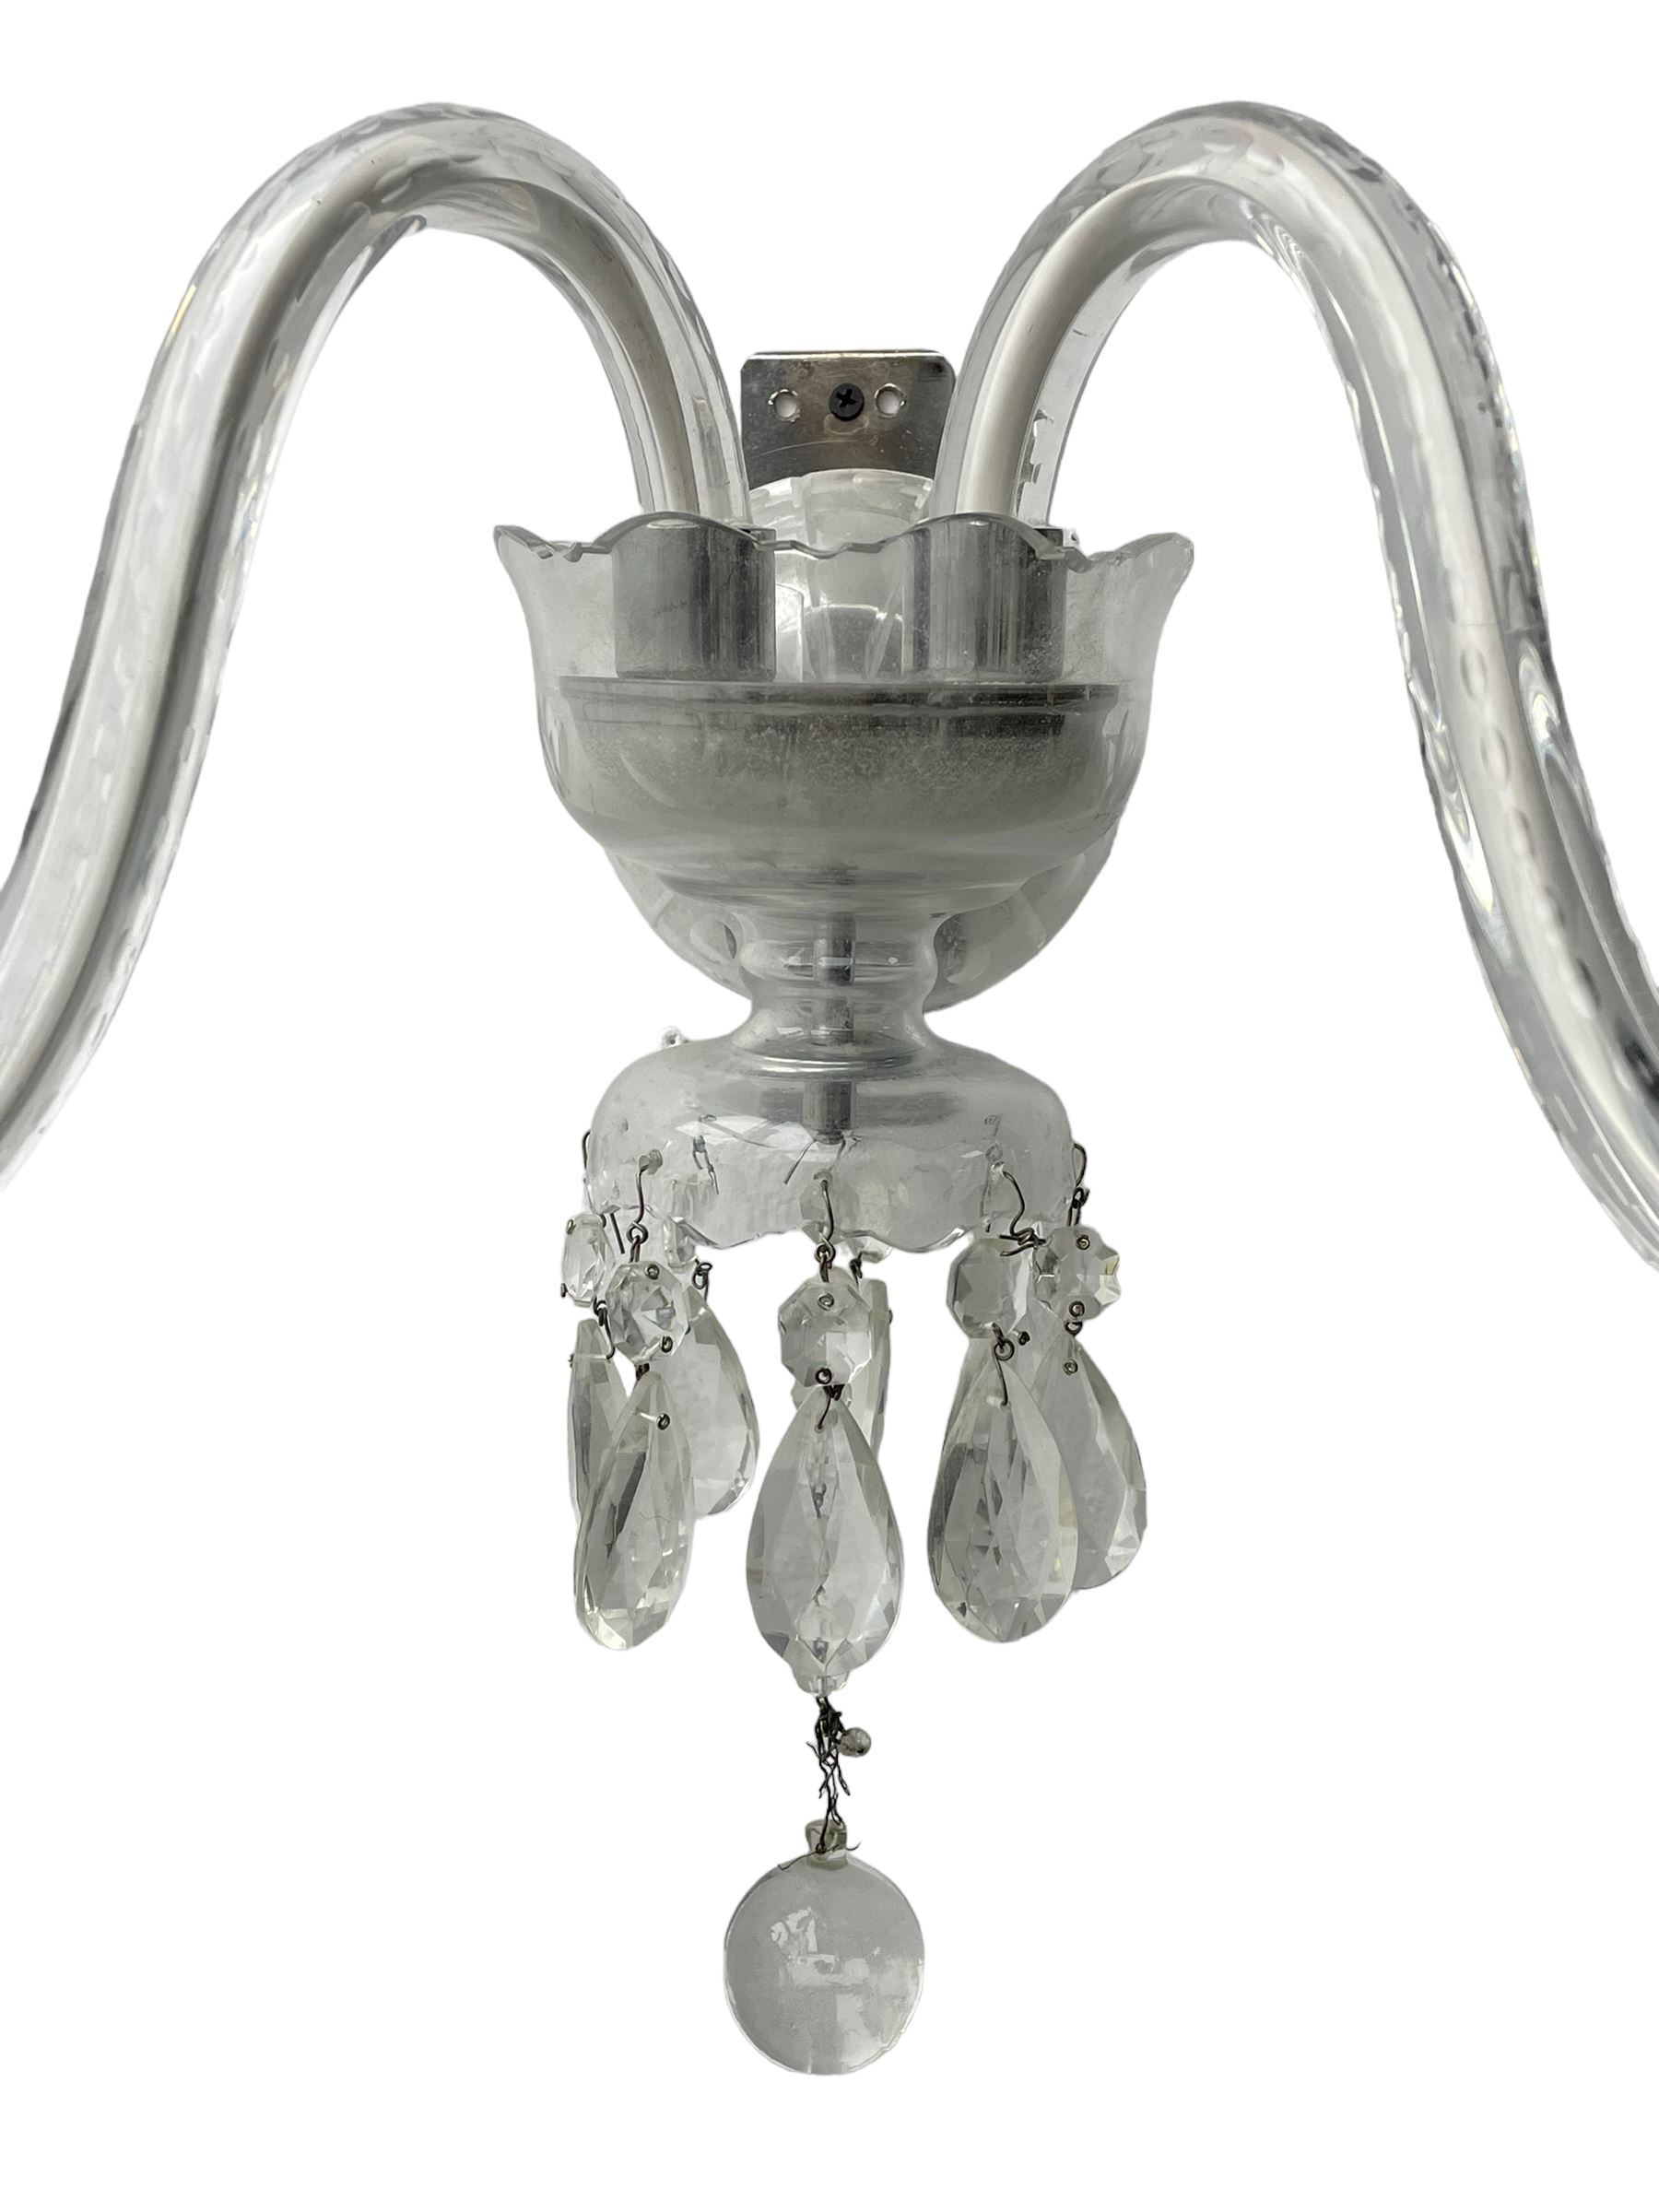 Pair of cut glass two branch wall sconce candelabras - Image 10 of 10